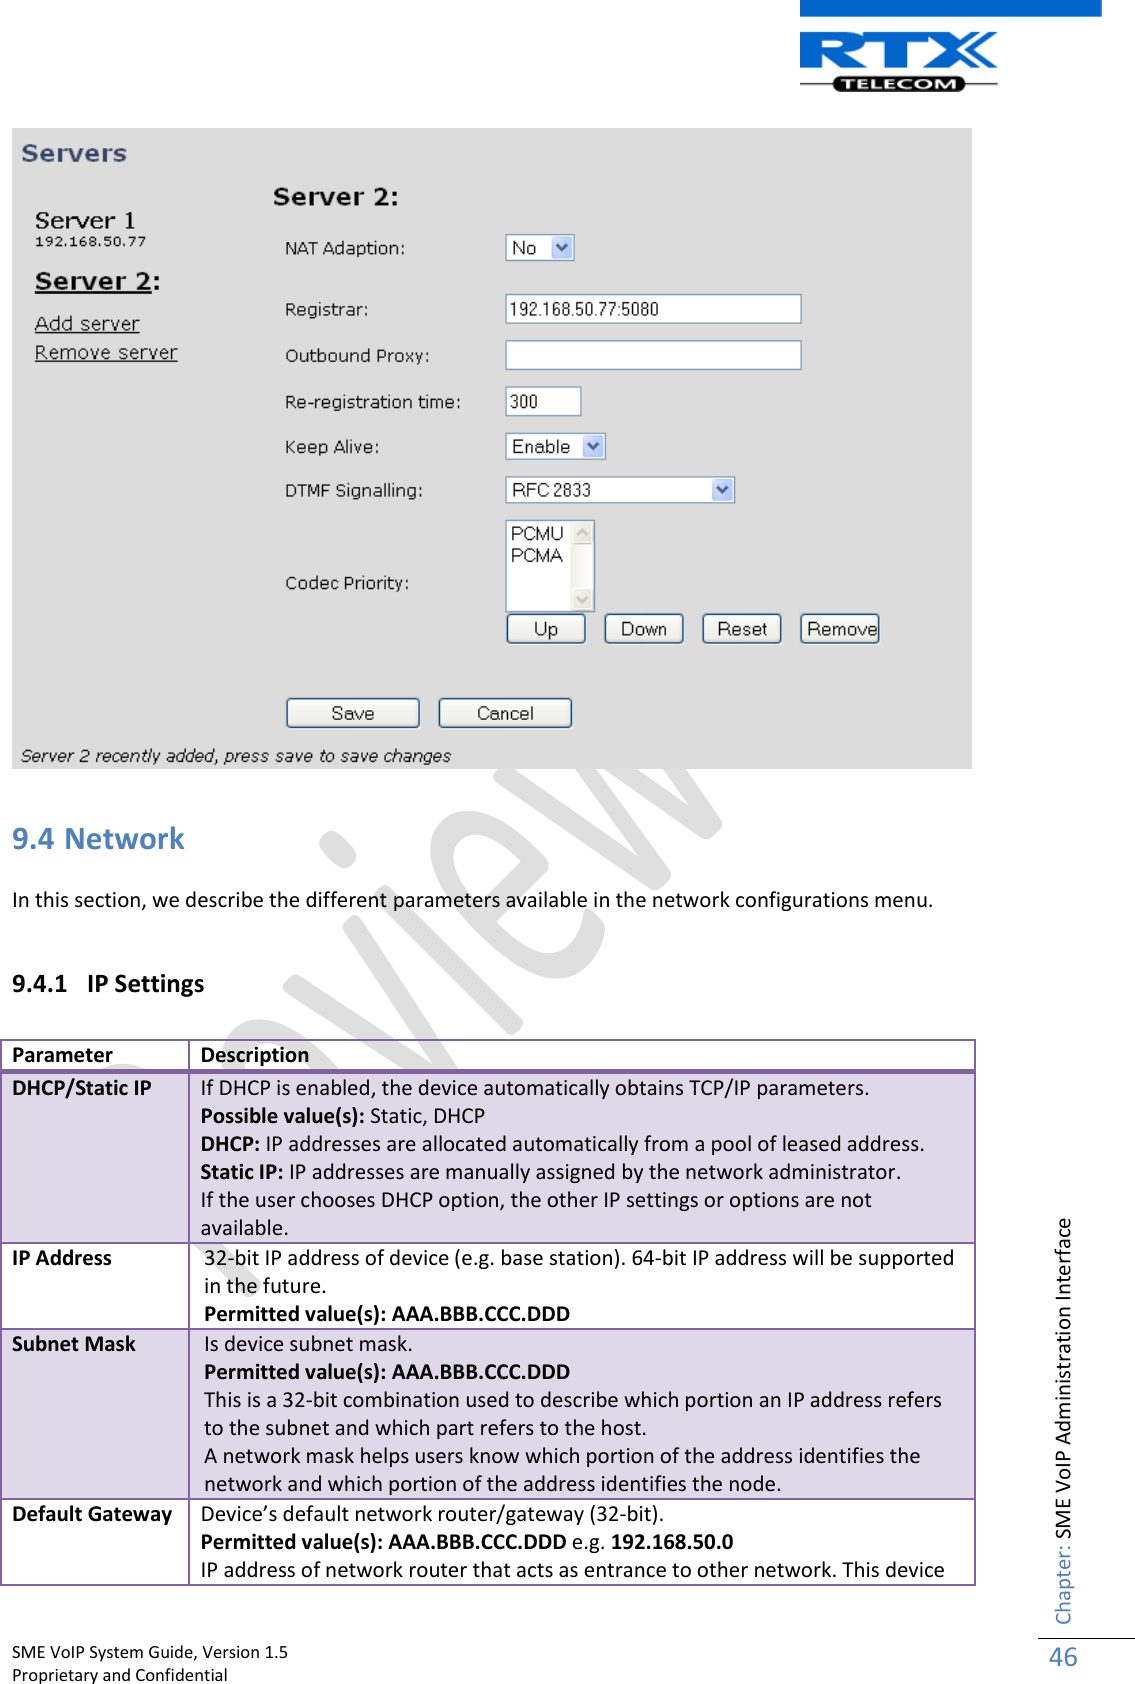    SME VoIP System Guide, Version 1.5                                                                                                                                                          Proprietary and Confidential    Chapter: SME VoIP Administration Interface 46    9.4 Network  In this section, we describe the different parameters available in the network configurations menu.  9.4.1 IP Settings   Parameter Description DHCP/Static IP If DHCP is enabled, the device automatically obtains TCP/IP parameters. Possible value(s): Static, DHCP DHCP: IP addresses are allocated automatically from a pool of leased address. Static IP: IP addresses are manually assigned by the network administrator. If the user chooses DHCP option, the other IP settings or options are not available. IP Address 32-bit IP address of device (e.g. base station). 64-bit IP address will be supported in the future. Permitted value(s): AAA.BBB.CCC.DDD Subnet Mask Is device subnet mask.  Permitted value(s): AAA.BBB.CCC.DDD This is a 32-bit combination used to describe which portion an IP address refers to the subnet and which part refers to the host. A network mask helps users know which portion of the address identifies the network and which portion of the address identifies the node.  Default Gateway Device’s default network router/gateway (32-bit). Permitted value(s): AAA.BBB.CCC.DDD e.g. 192.168.50.0 IP address of network router that acts as entrance to other network. This device 